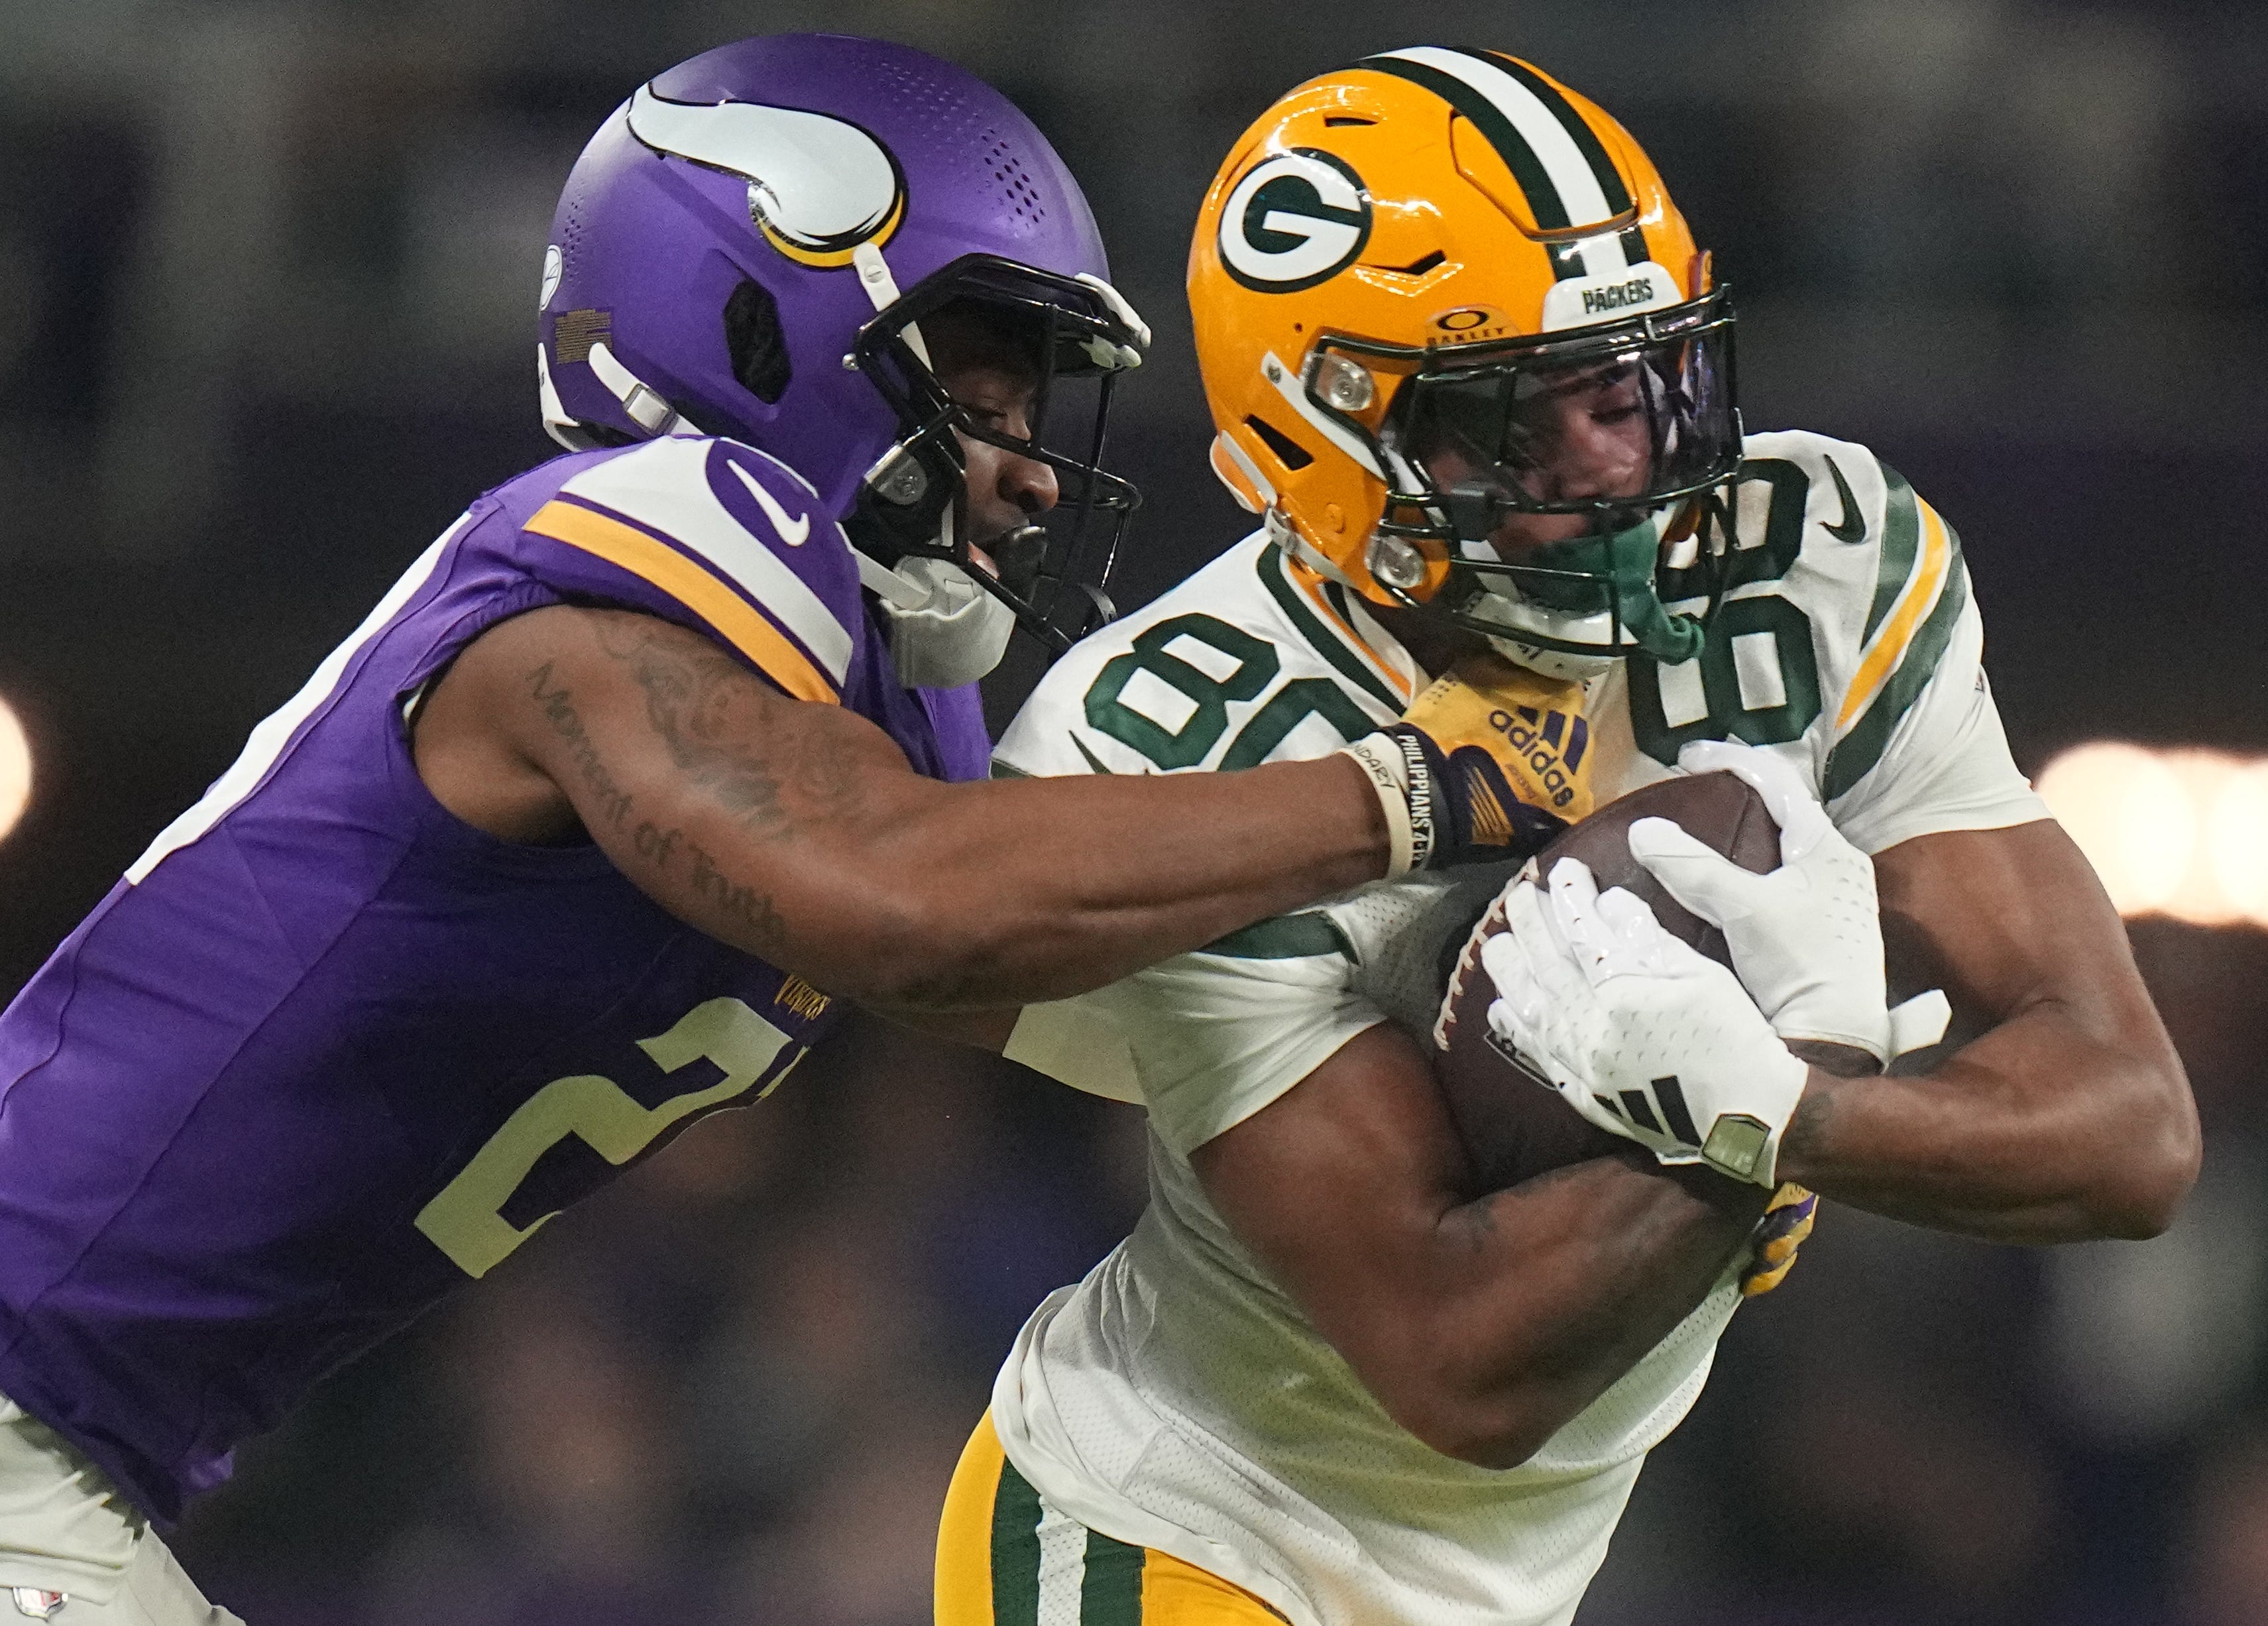 Green Bay Packers wide receiver Bo Melton (80) makes a 12-yard reception before being tackled by Minnesota Vikings cornerback Akayleb Evans (21) during the first quarter of their game Sunday, December 31, 2023 at U.S. Bank Stadium in Minneapolis, Minnesota.